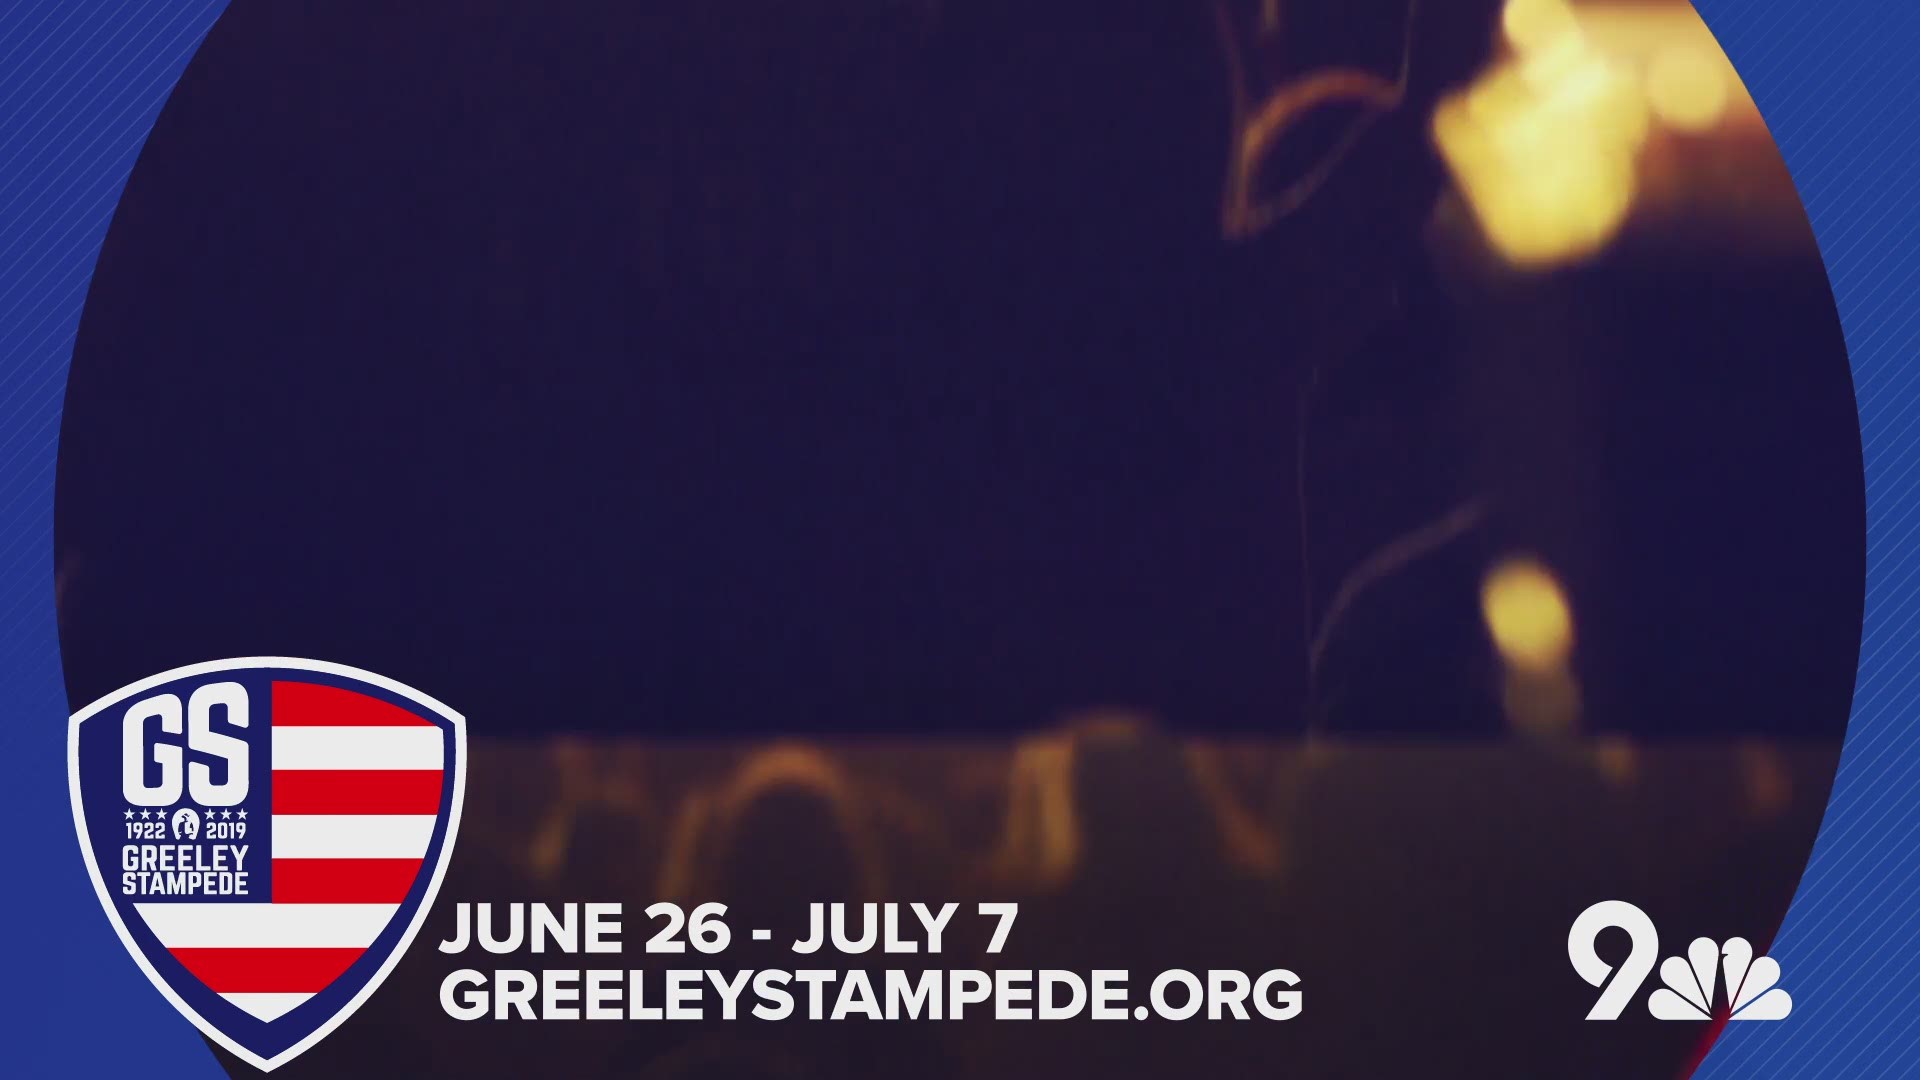 The 98th Greeley Stampede runs from June 26 to July 7 at the Island Grove Regional Park in Greeley. The 13-day festival has been a Colorado tradition since 1922 focused on celebrating and preserving our state's Western heritage through rodeo, concerts, a carnival, vendor fair, food and more. For tickets, visit GreeleyStampede.org.